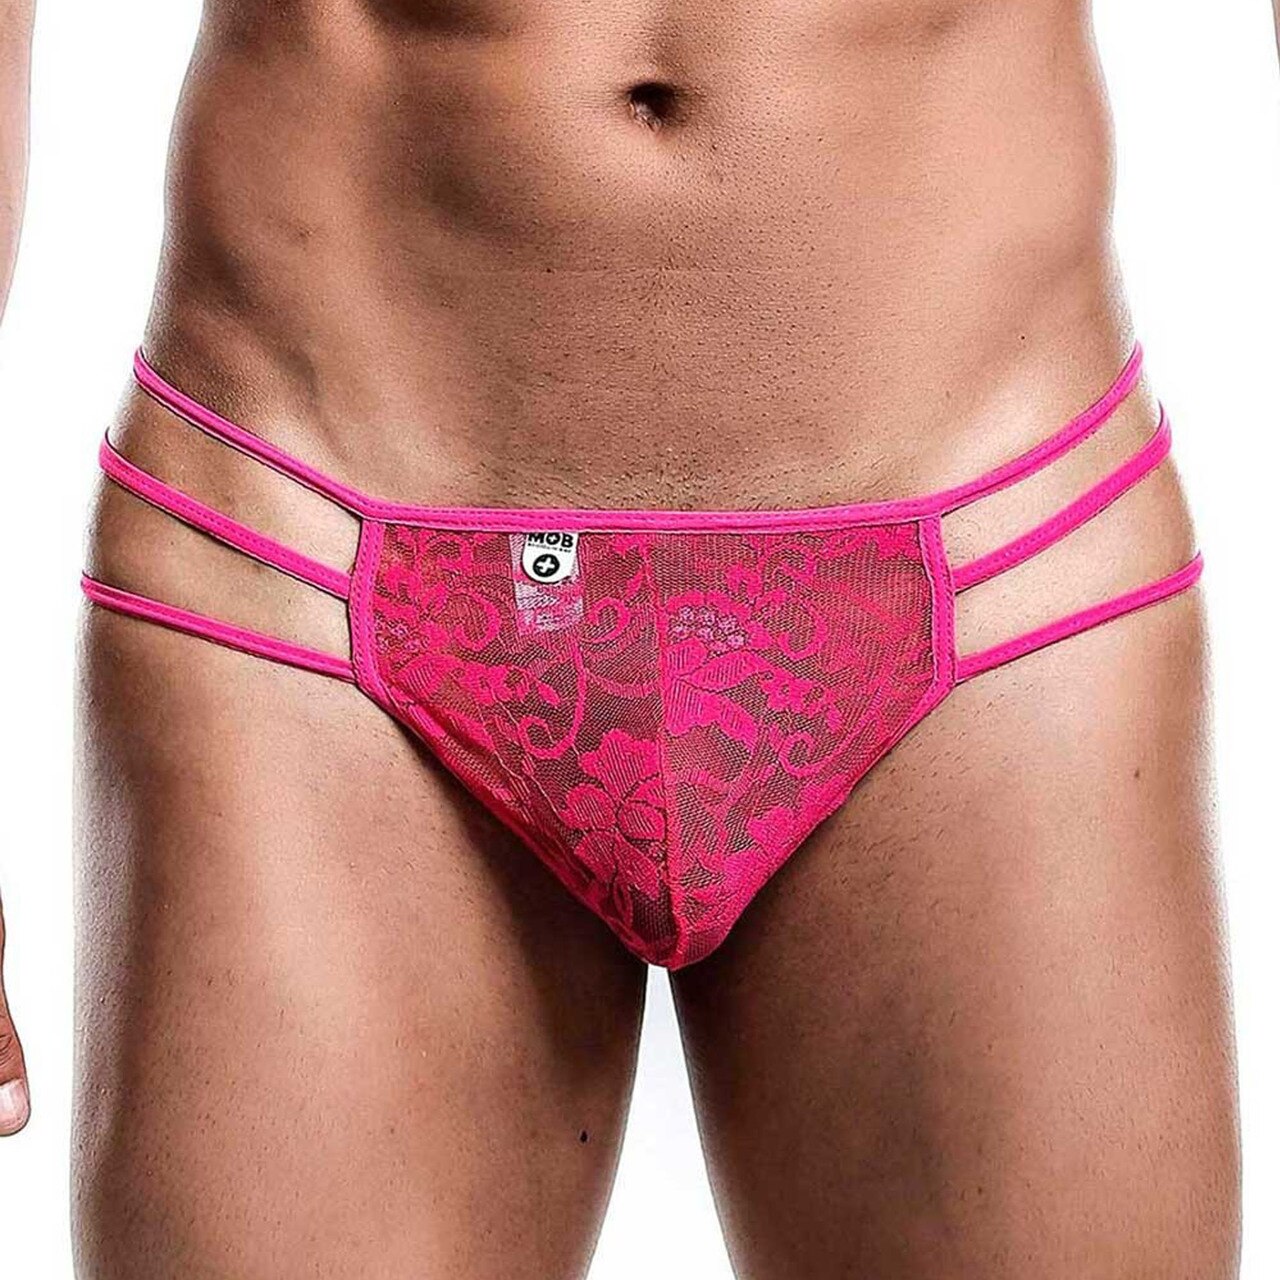 SALE - Mens Male Basics Lace G string Thong with Triple Straps Hot Pink